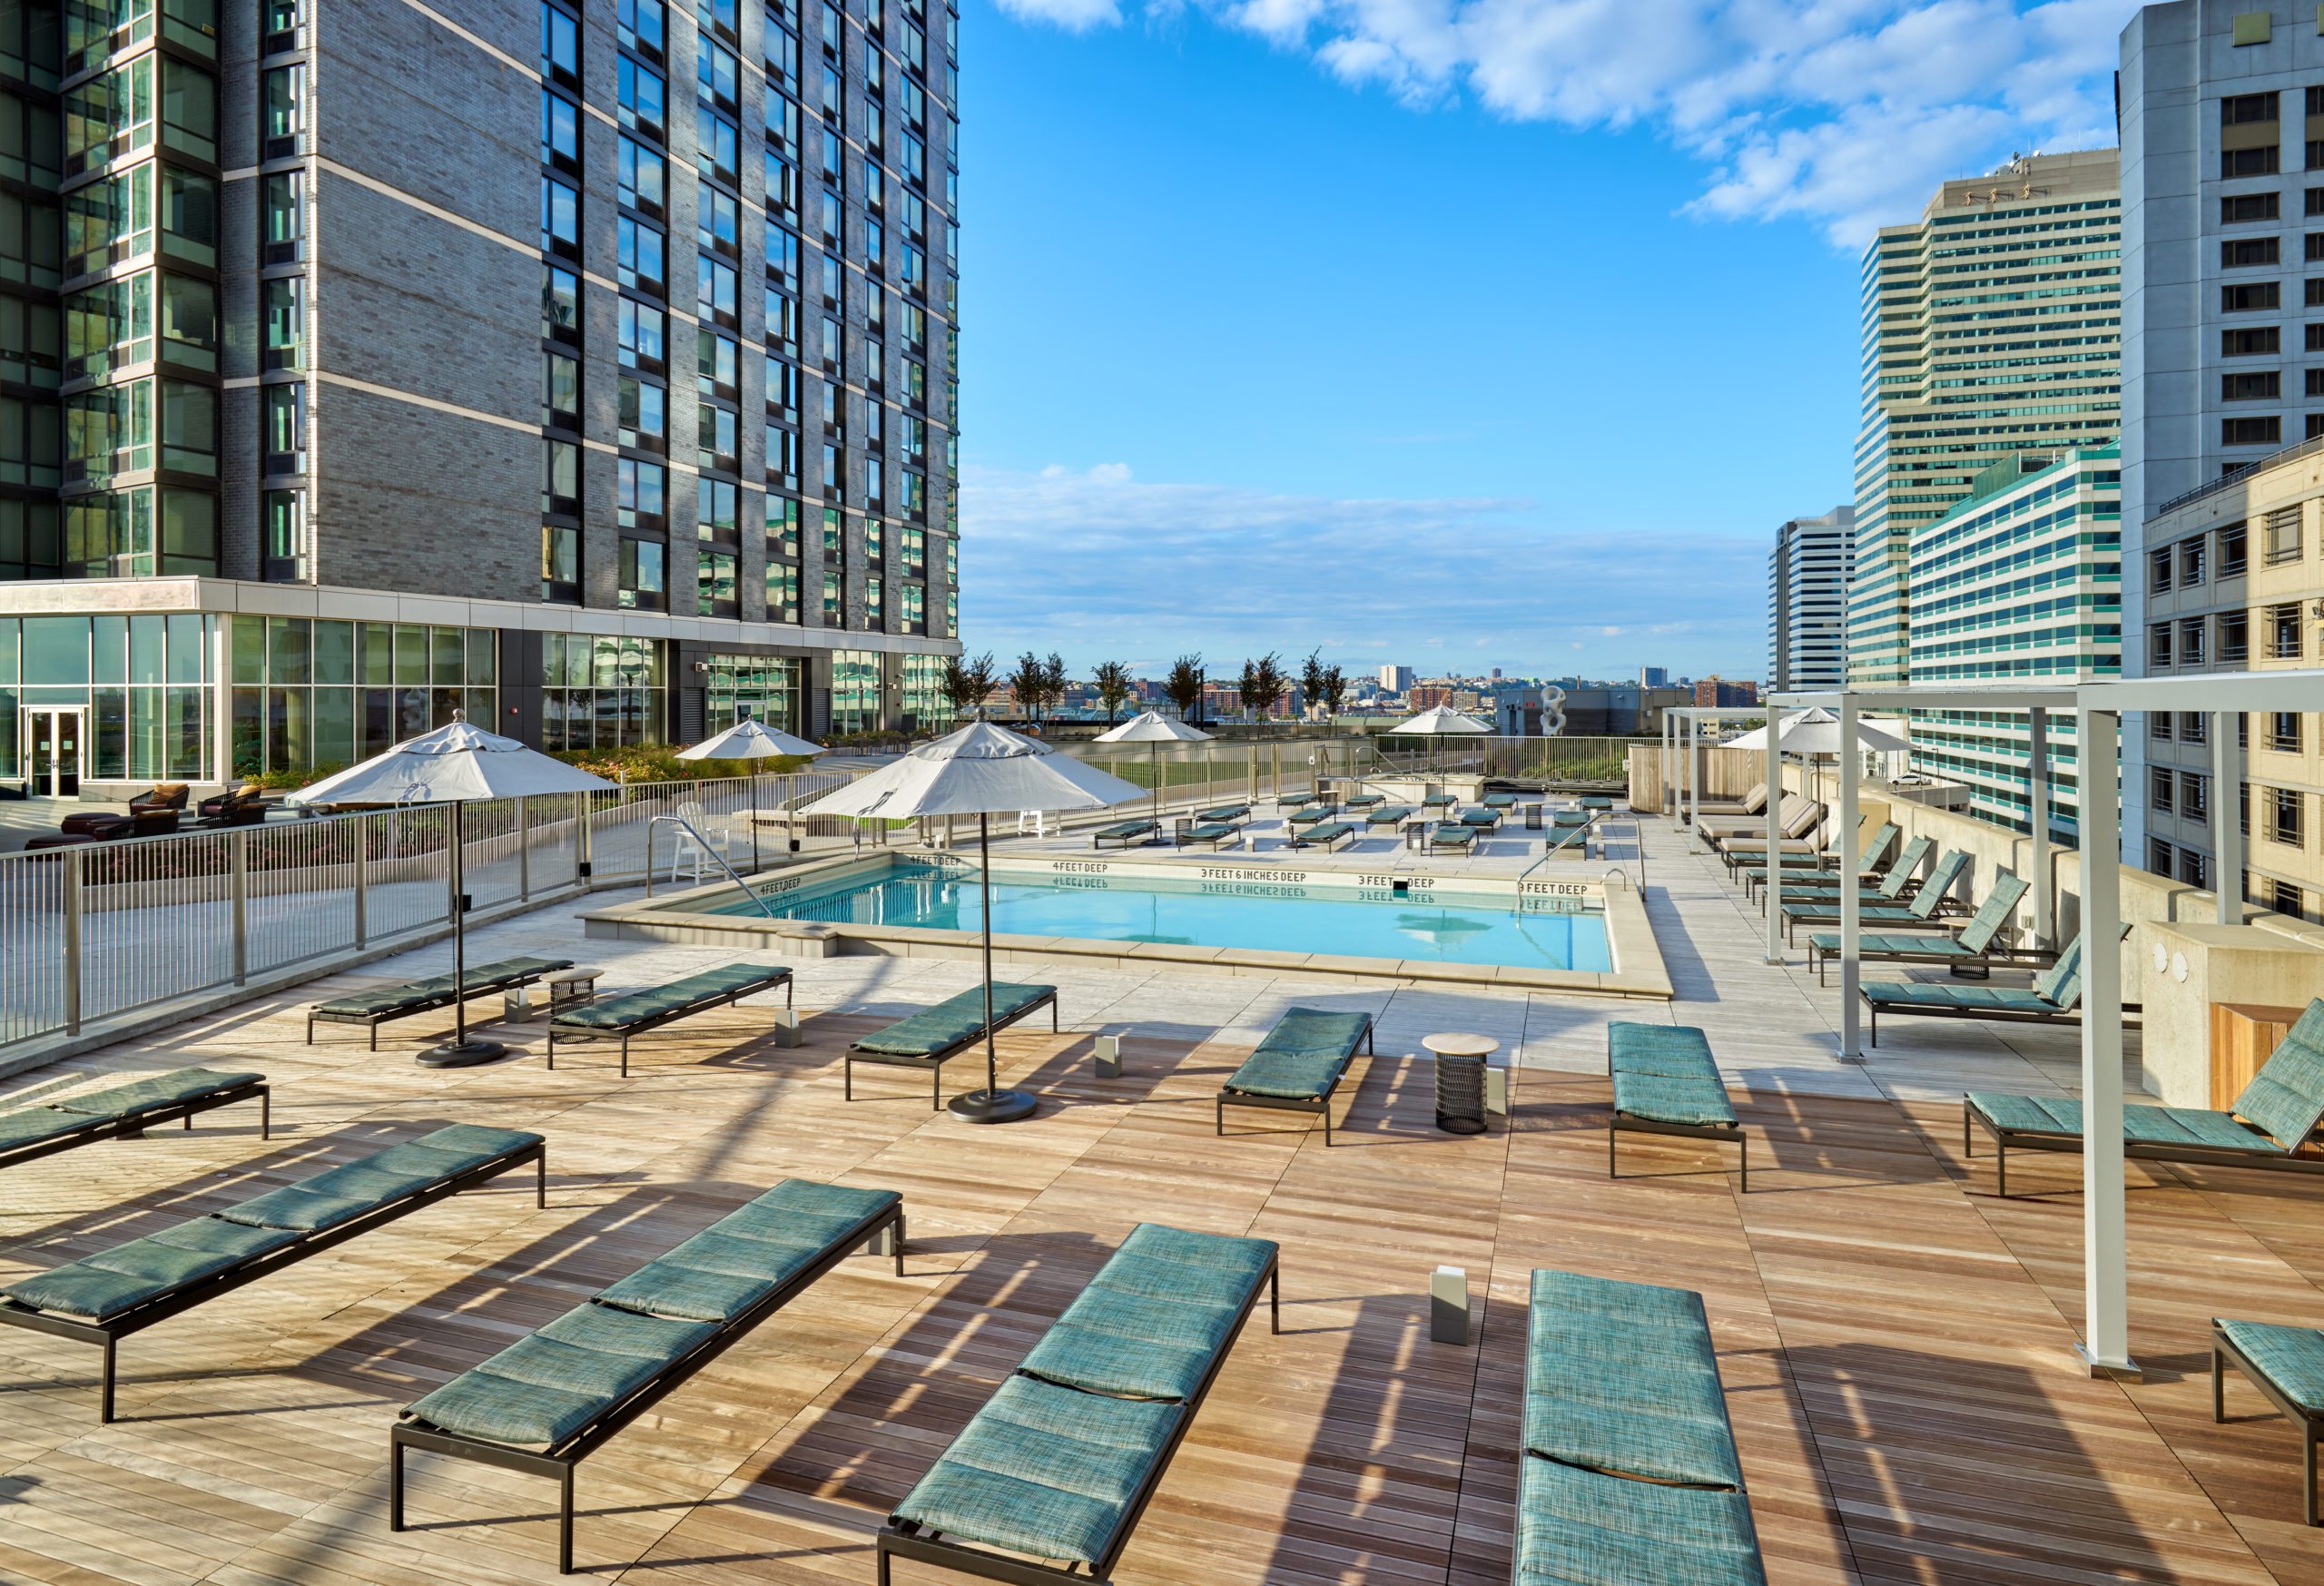 vyv south roof deck pool